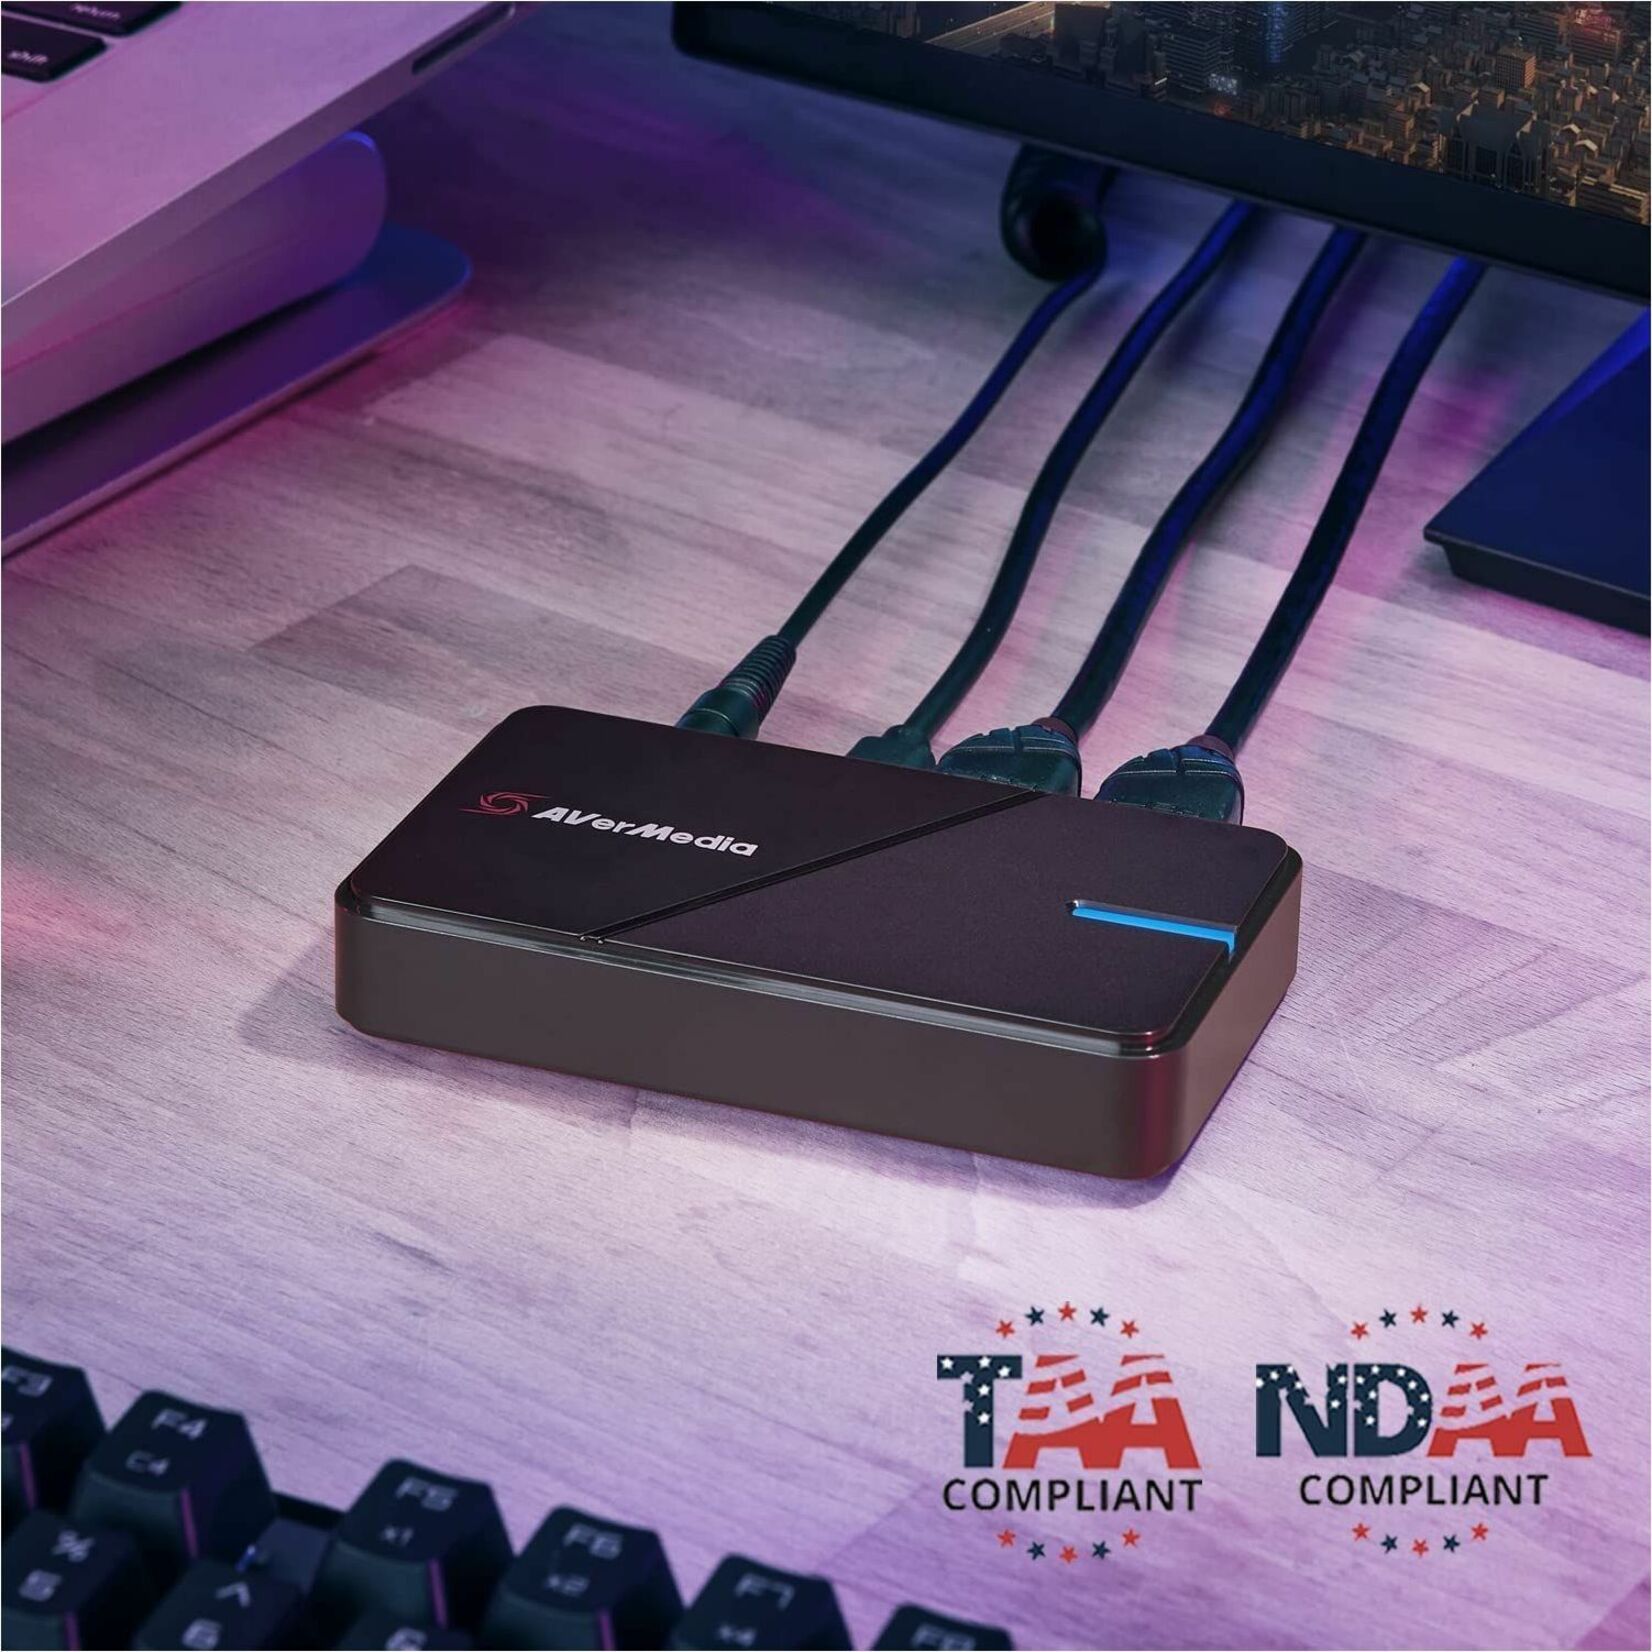 AVerMedia GC551G2 Live Gamer EXTREME 3 Plug and Play 4K Capture Card TAA and NDAA Compliant